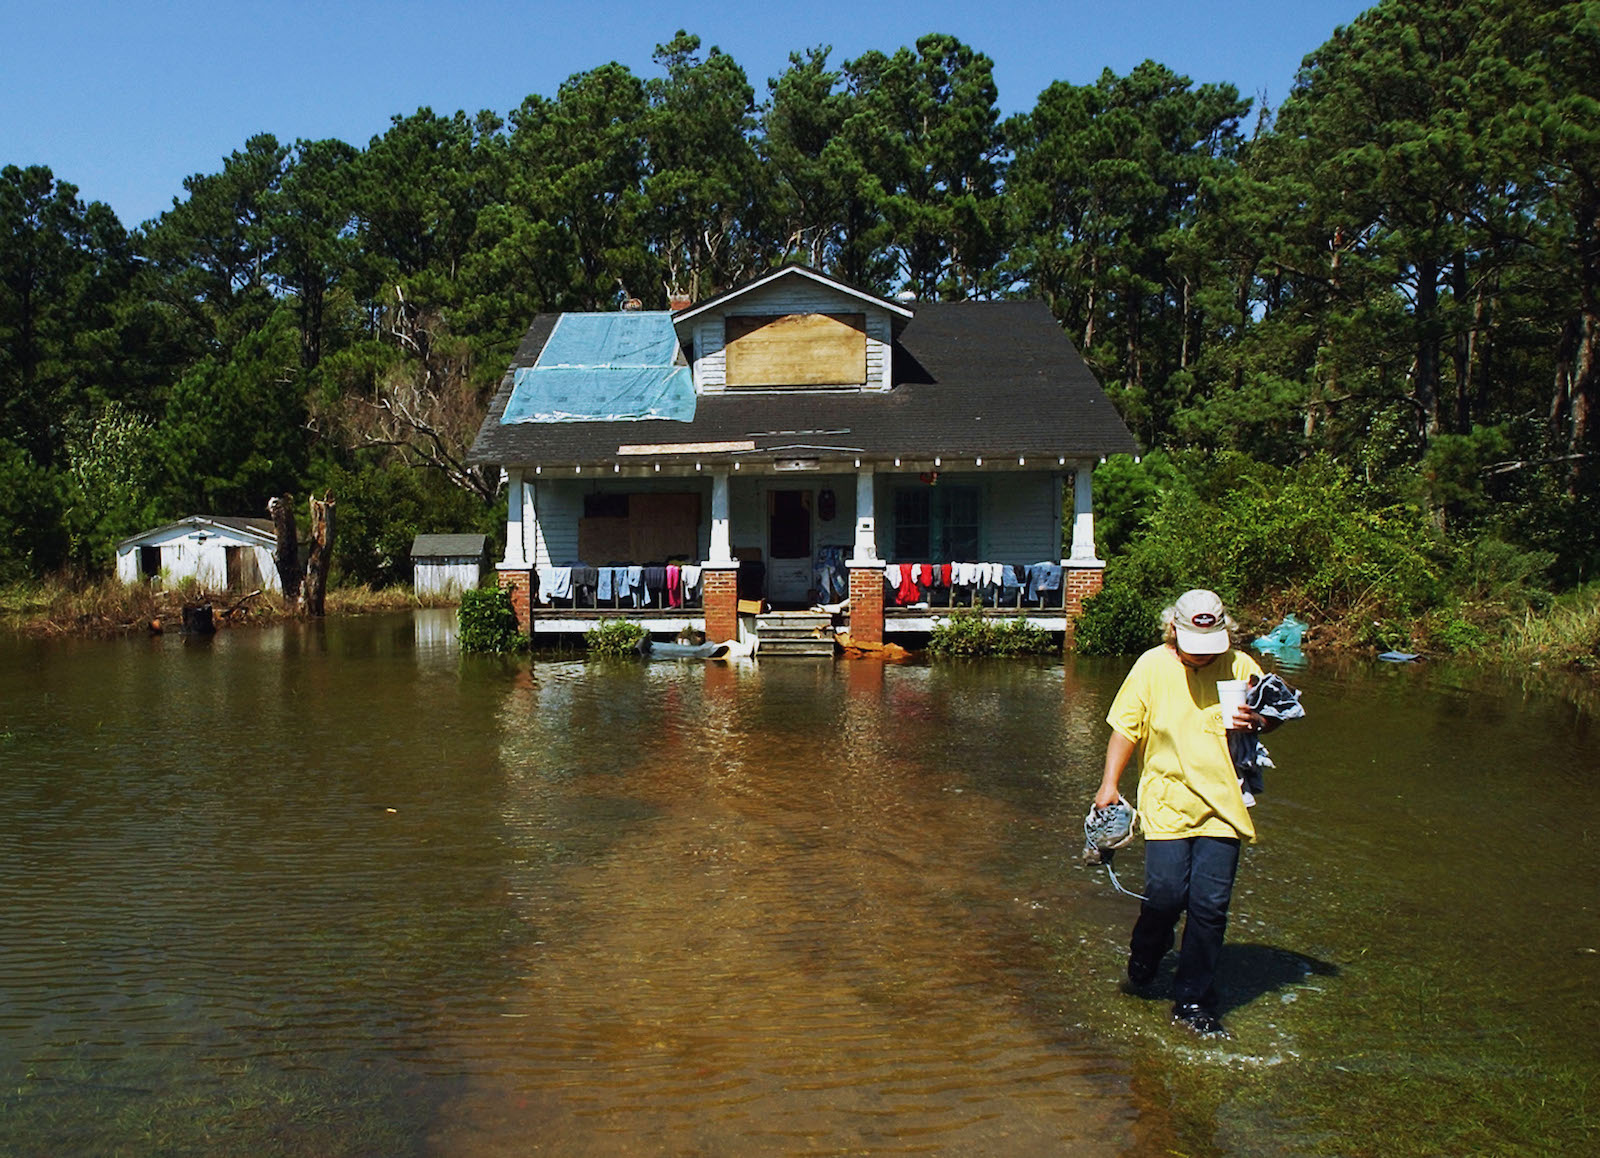 a woman in a hat and t-shirt walks through flood water in front of a patched up house